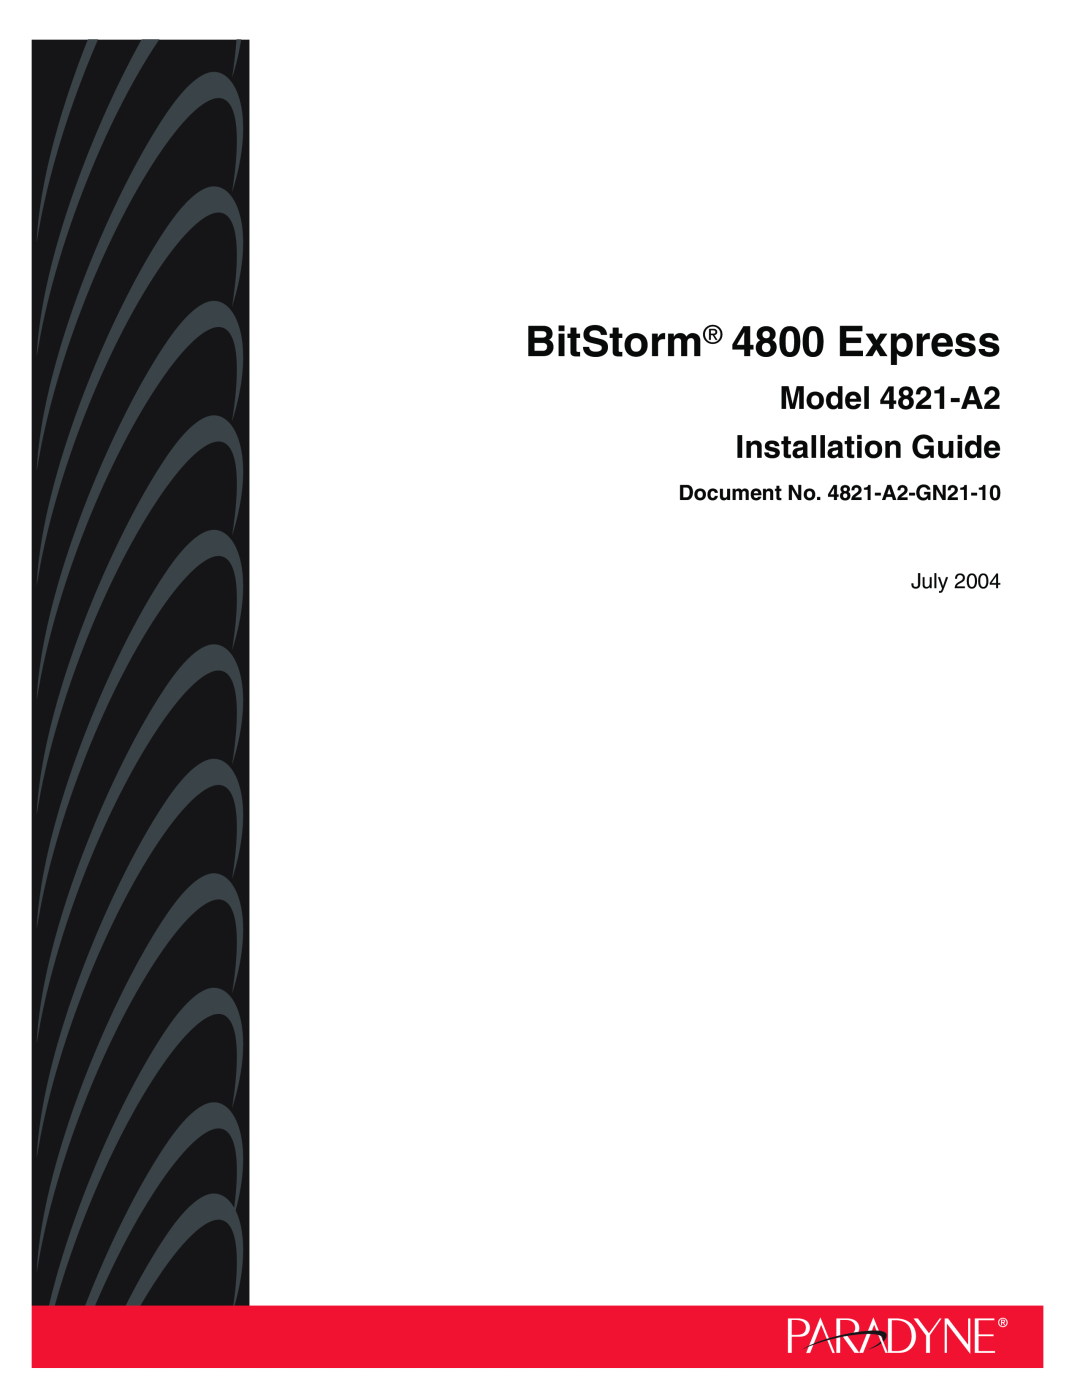 Paradyne manual BitStorm 4800 Express, Model 4821-A2 Installation Guide, Document No. 4821-A2-GN21-10, July 